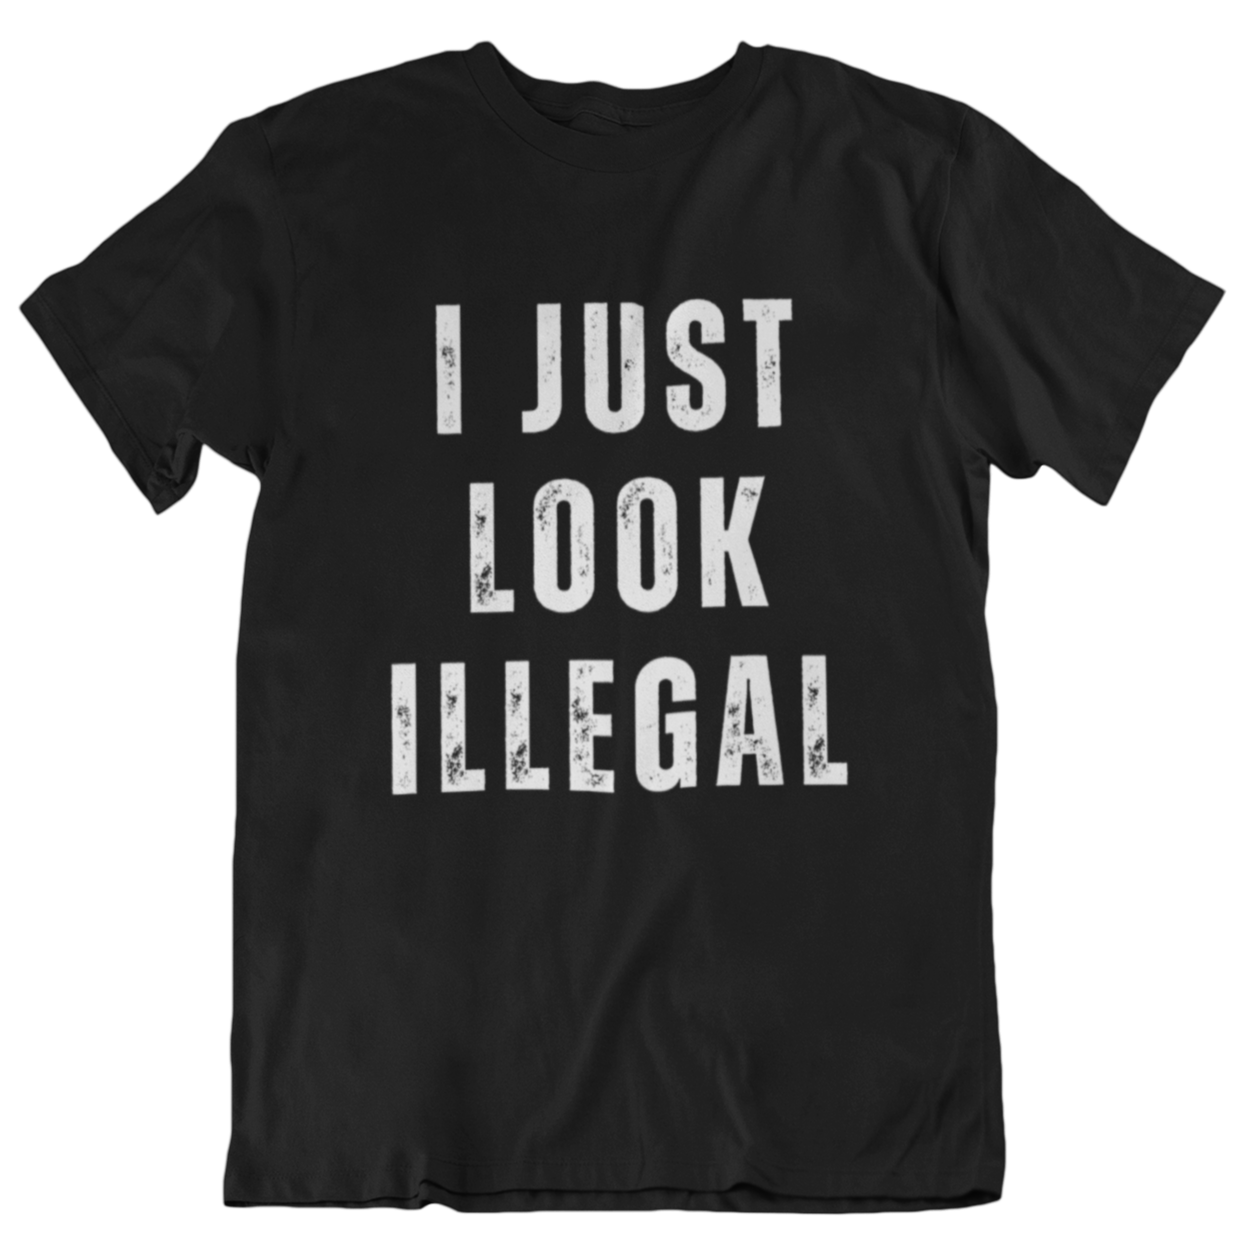 Latino Streetwear-style t-shirt with the graphic 'I Just Look Illegal' on a black tee shirt